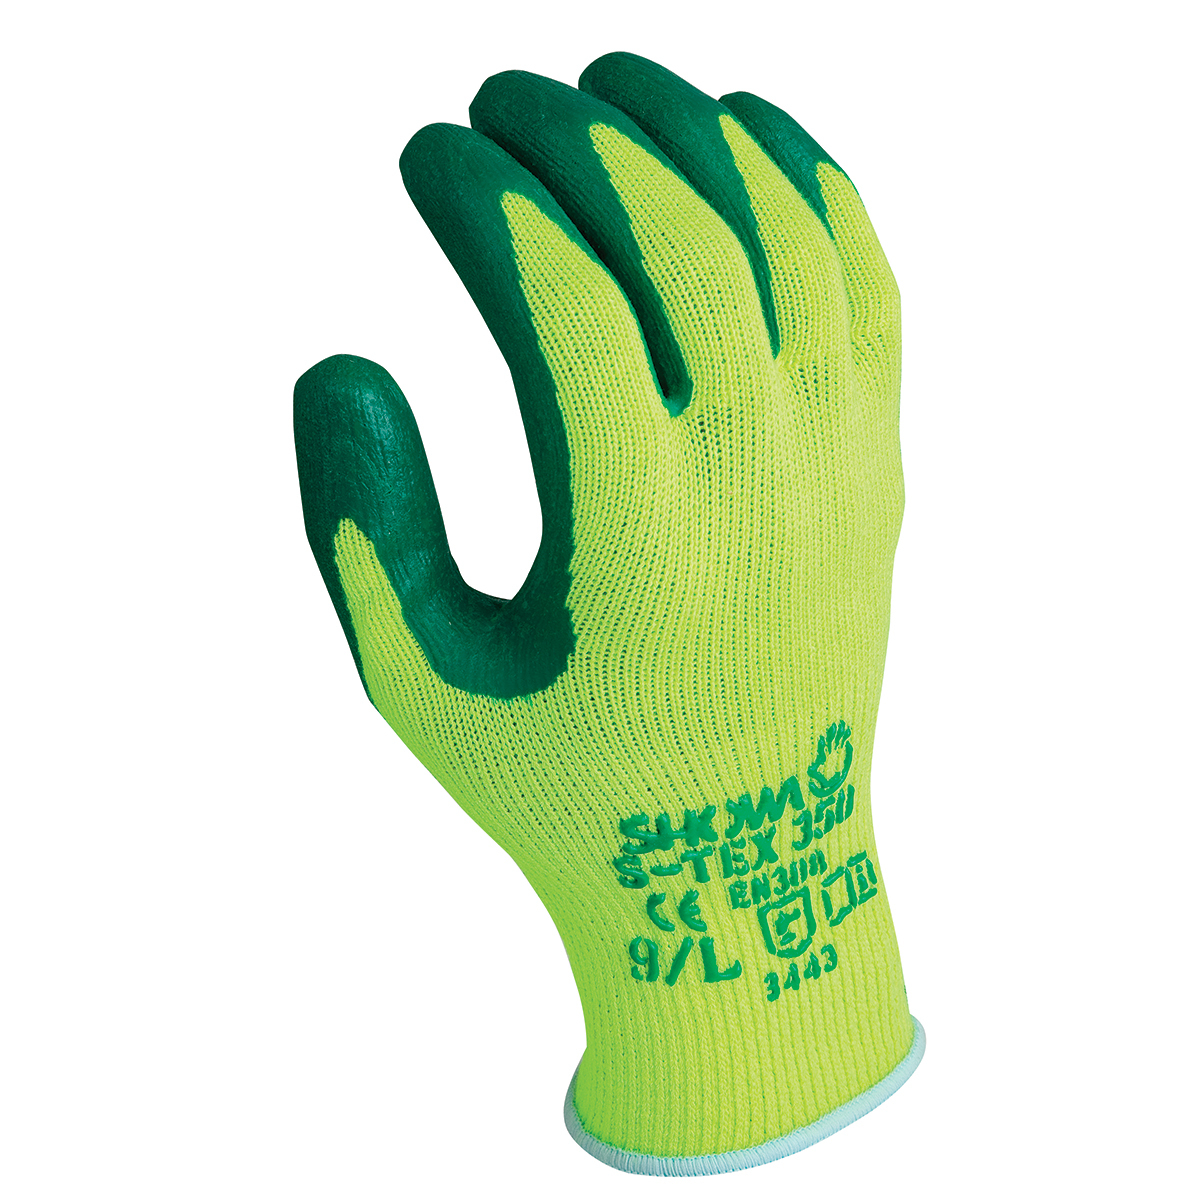 SHOWA® S-TEX® 350 10 Gauge Hagane Coil® And Polyester And Stainless Steel Cut Resistant Gloves With Nitrile Coating